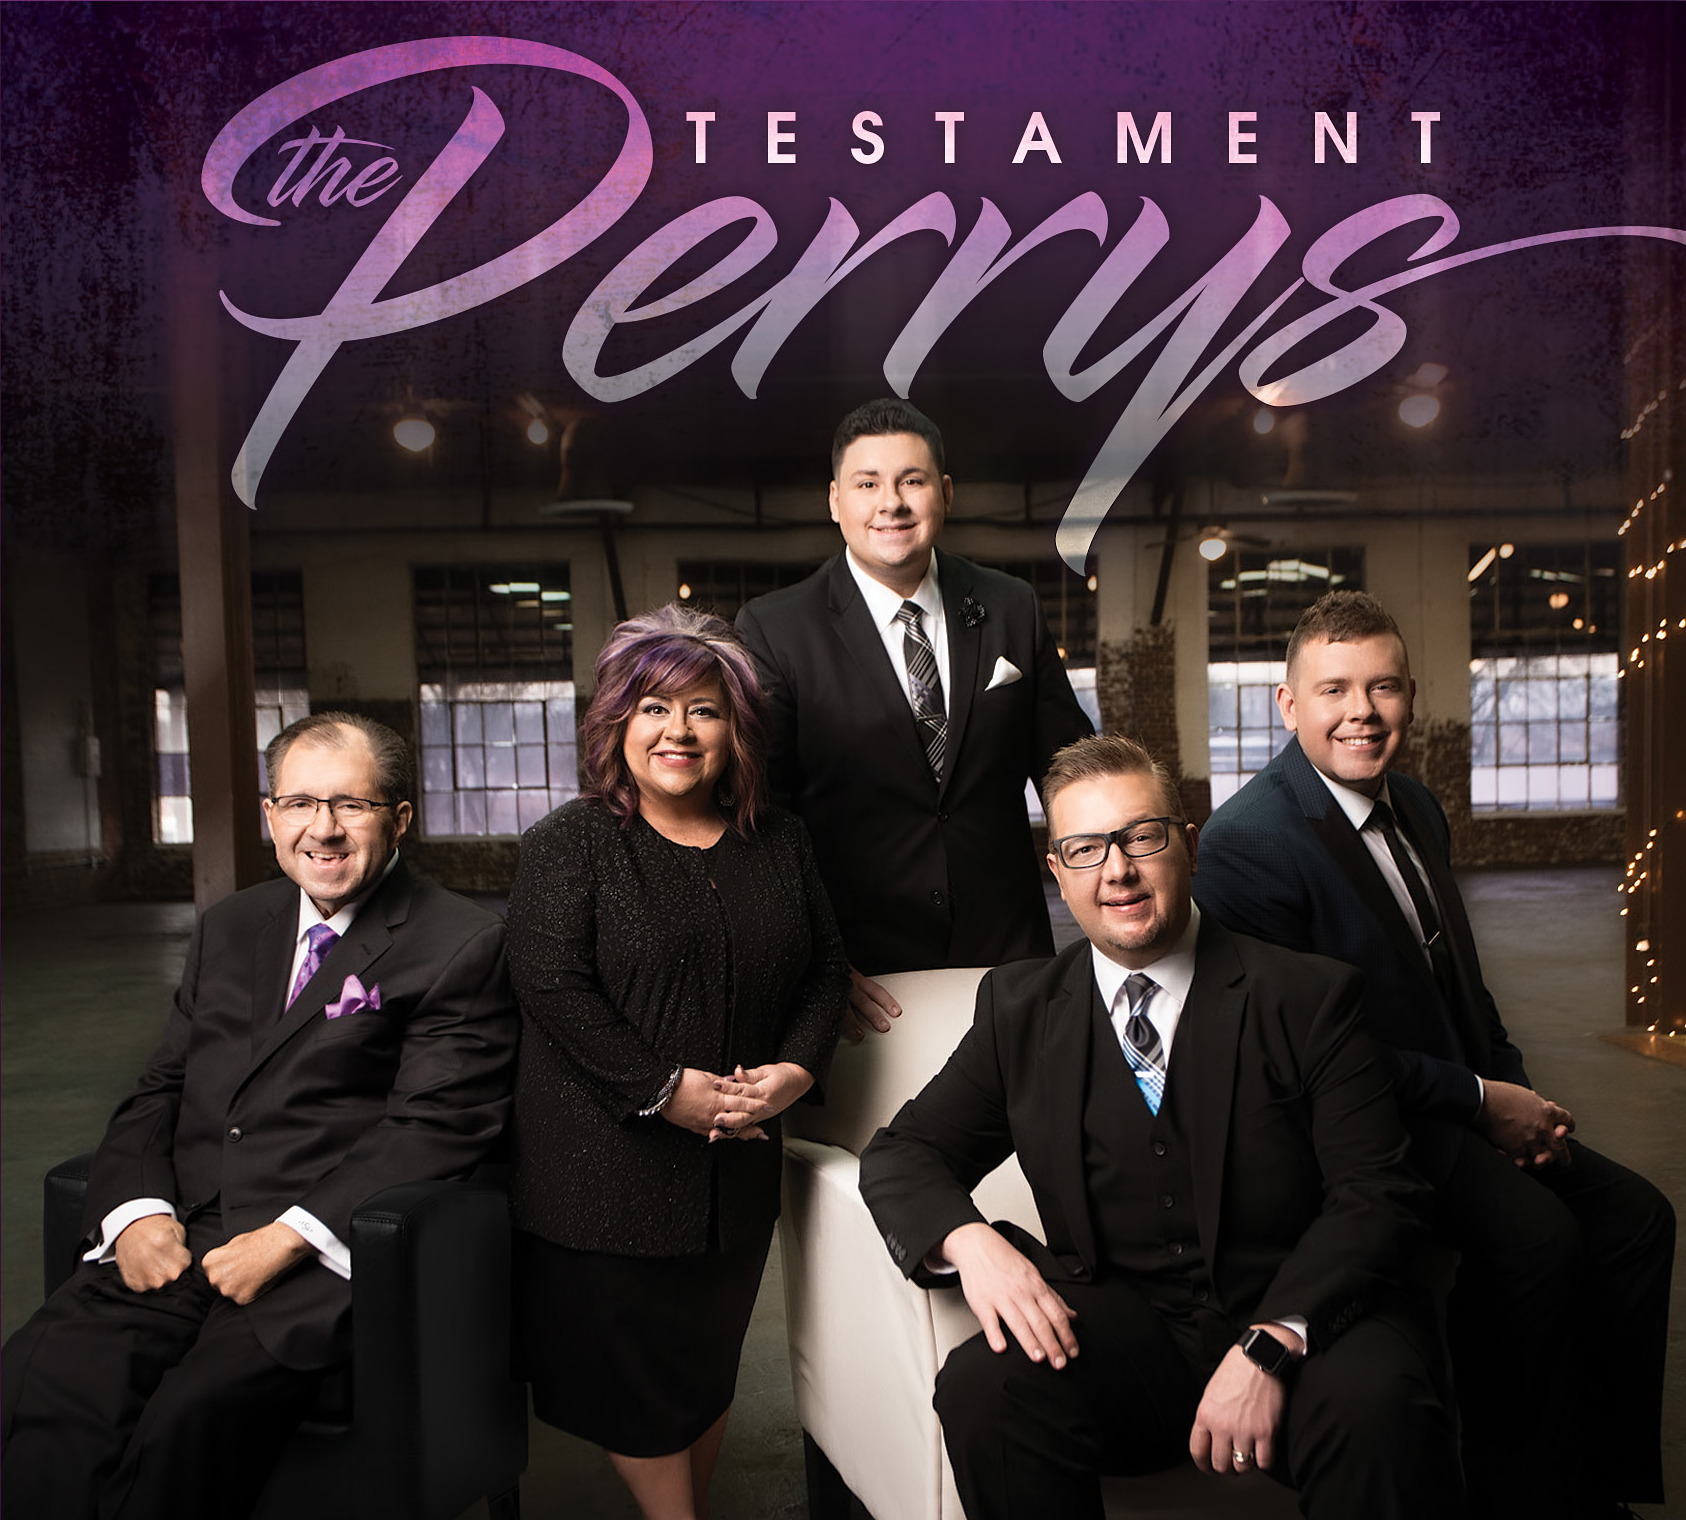 The Perrys | Testament